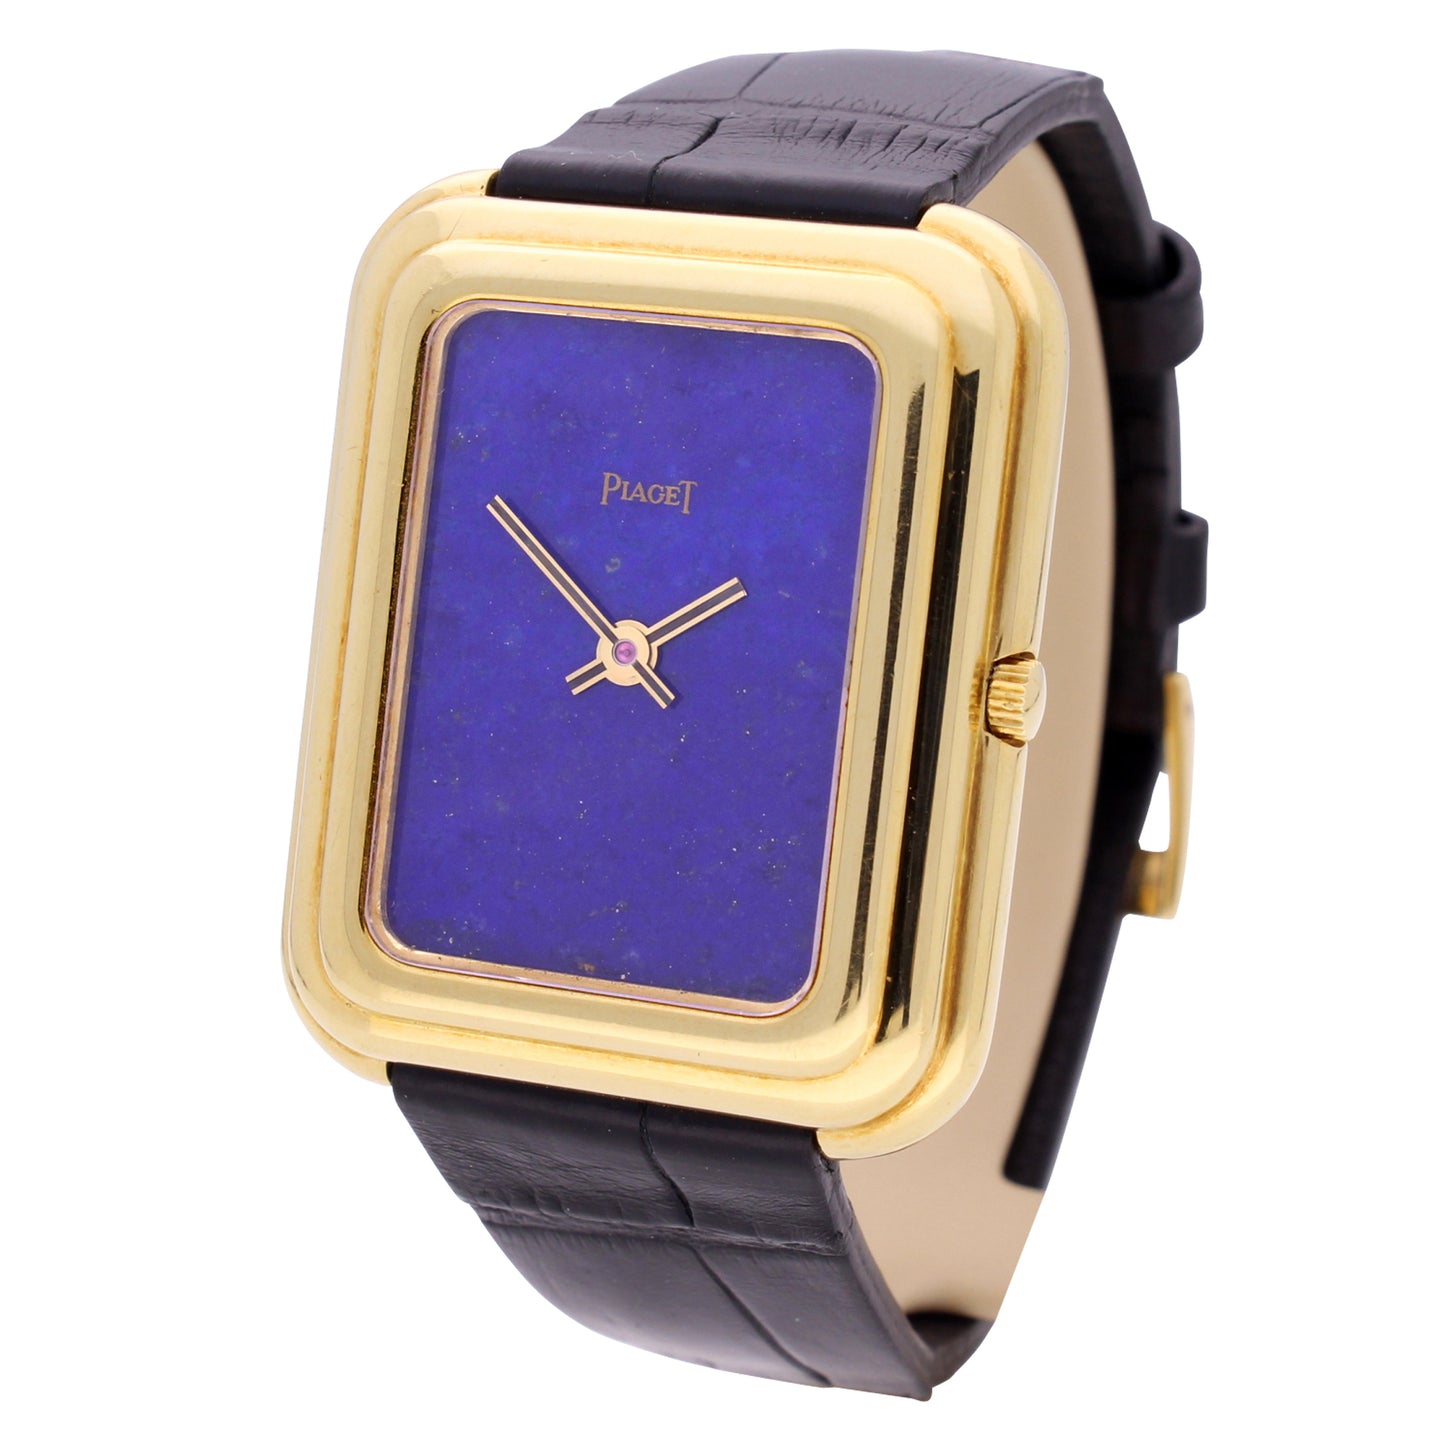 18ct yellow gold Piaget Beta 21, reference 1401/1, with lapis lazuli dial. Made 1970